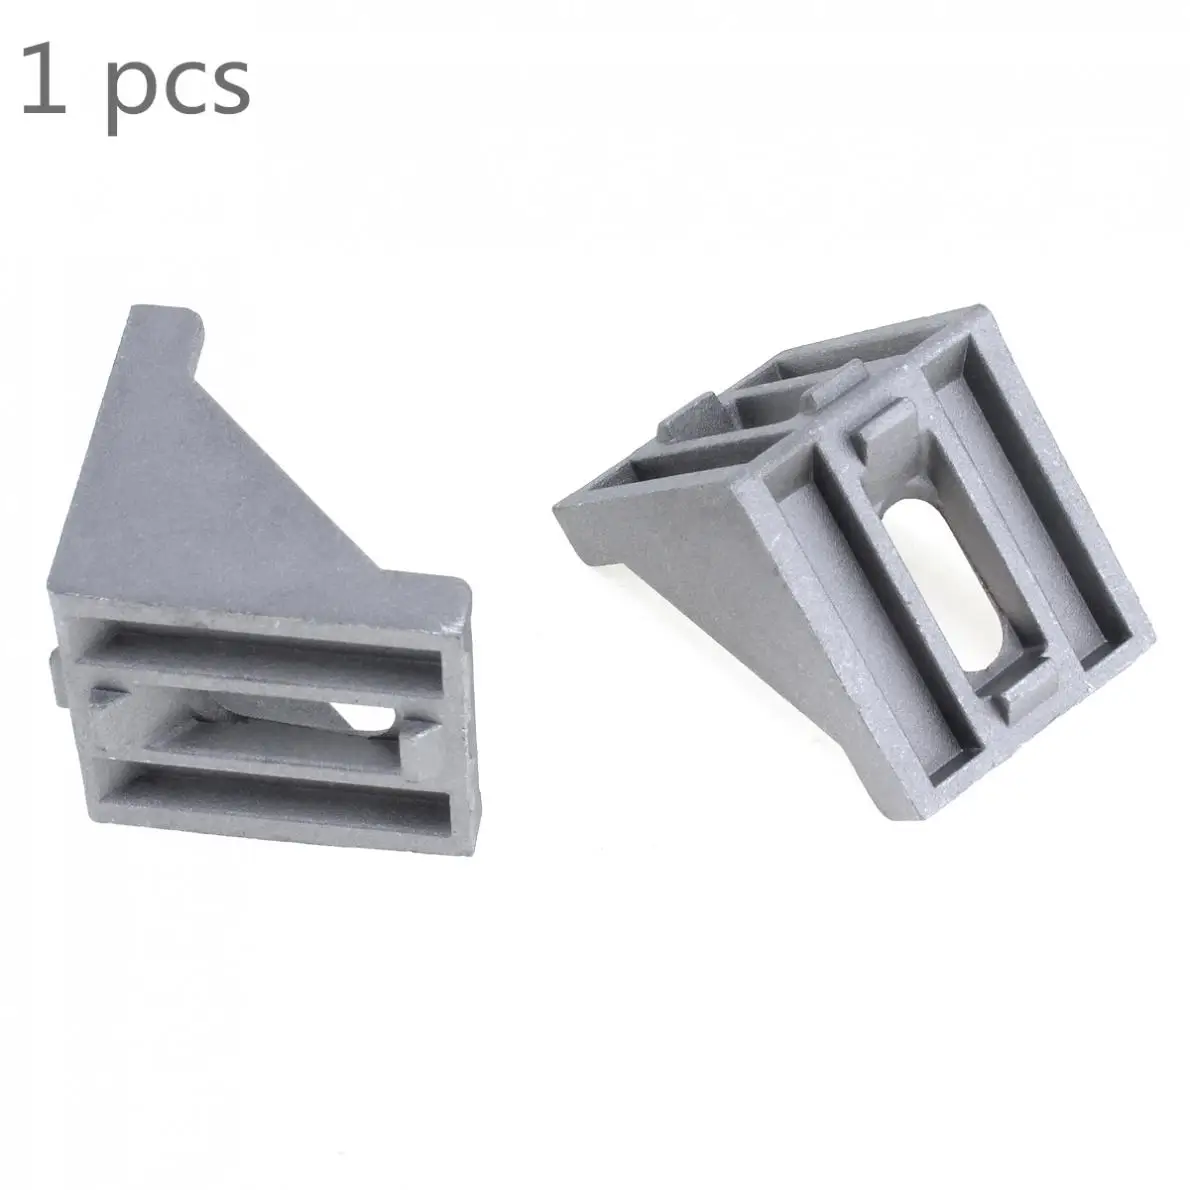 

1pc 4040 Aluminum Angle Code with Nut Hole Support T-slot Profile Frame Extrusion Bracket for Connecting The Flow Profile